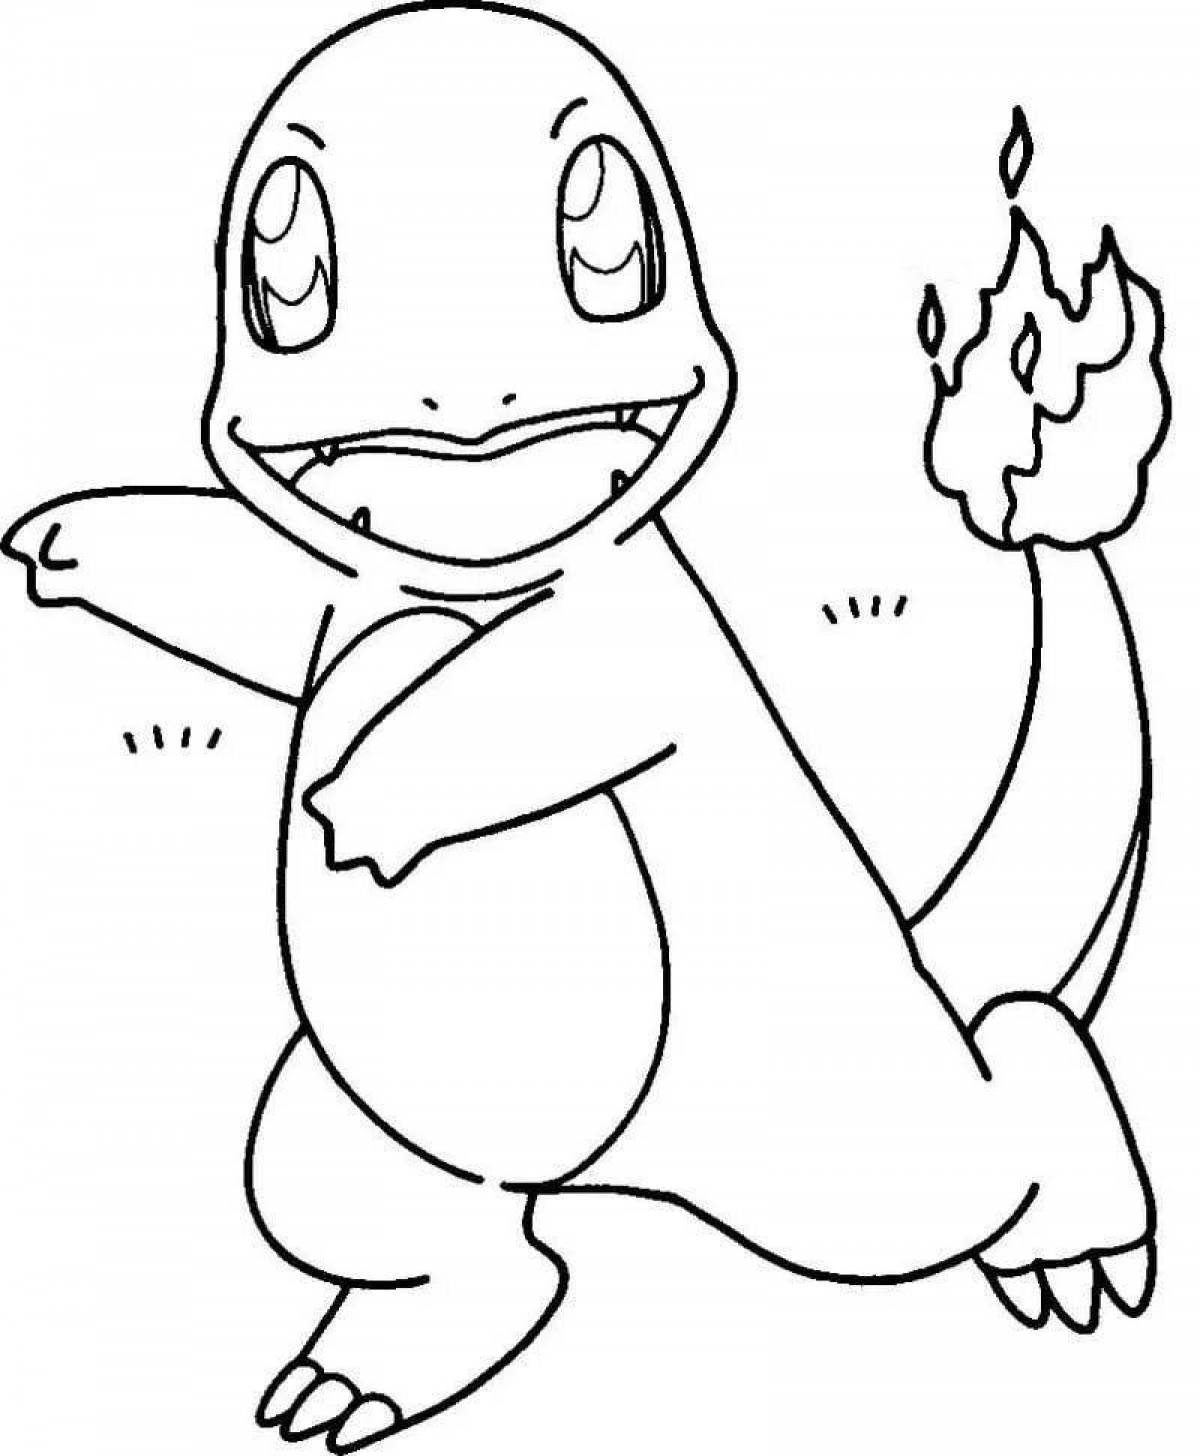 Colorful charmander coloring page